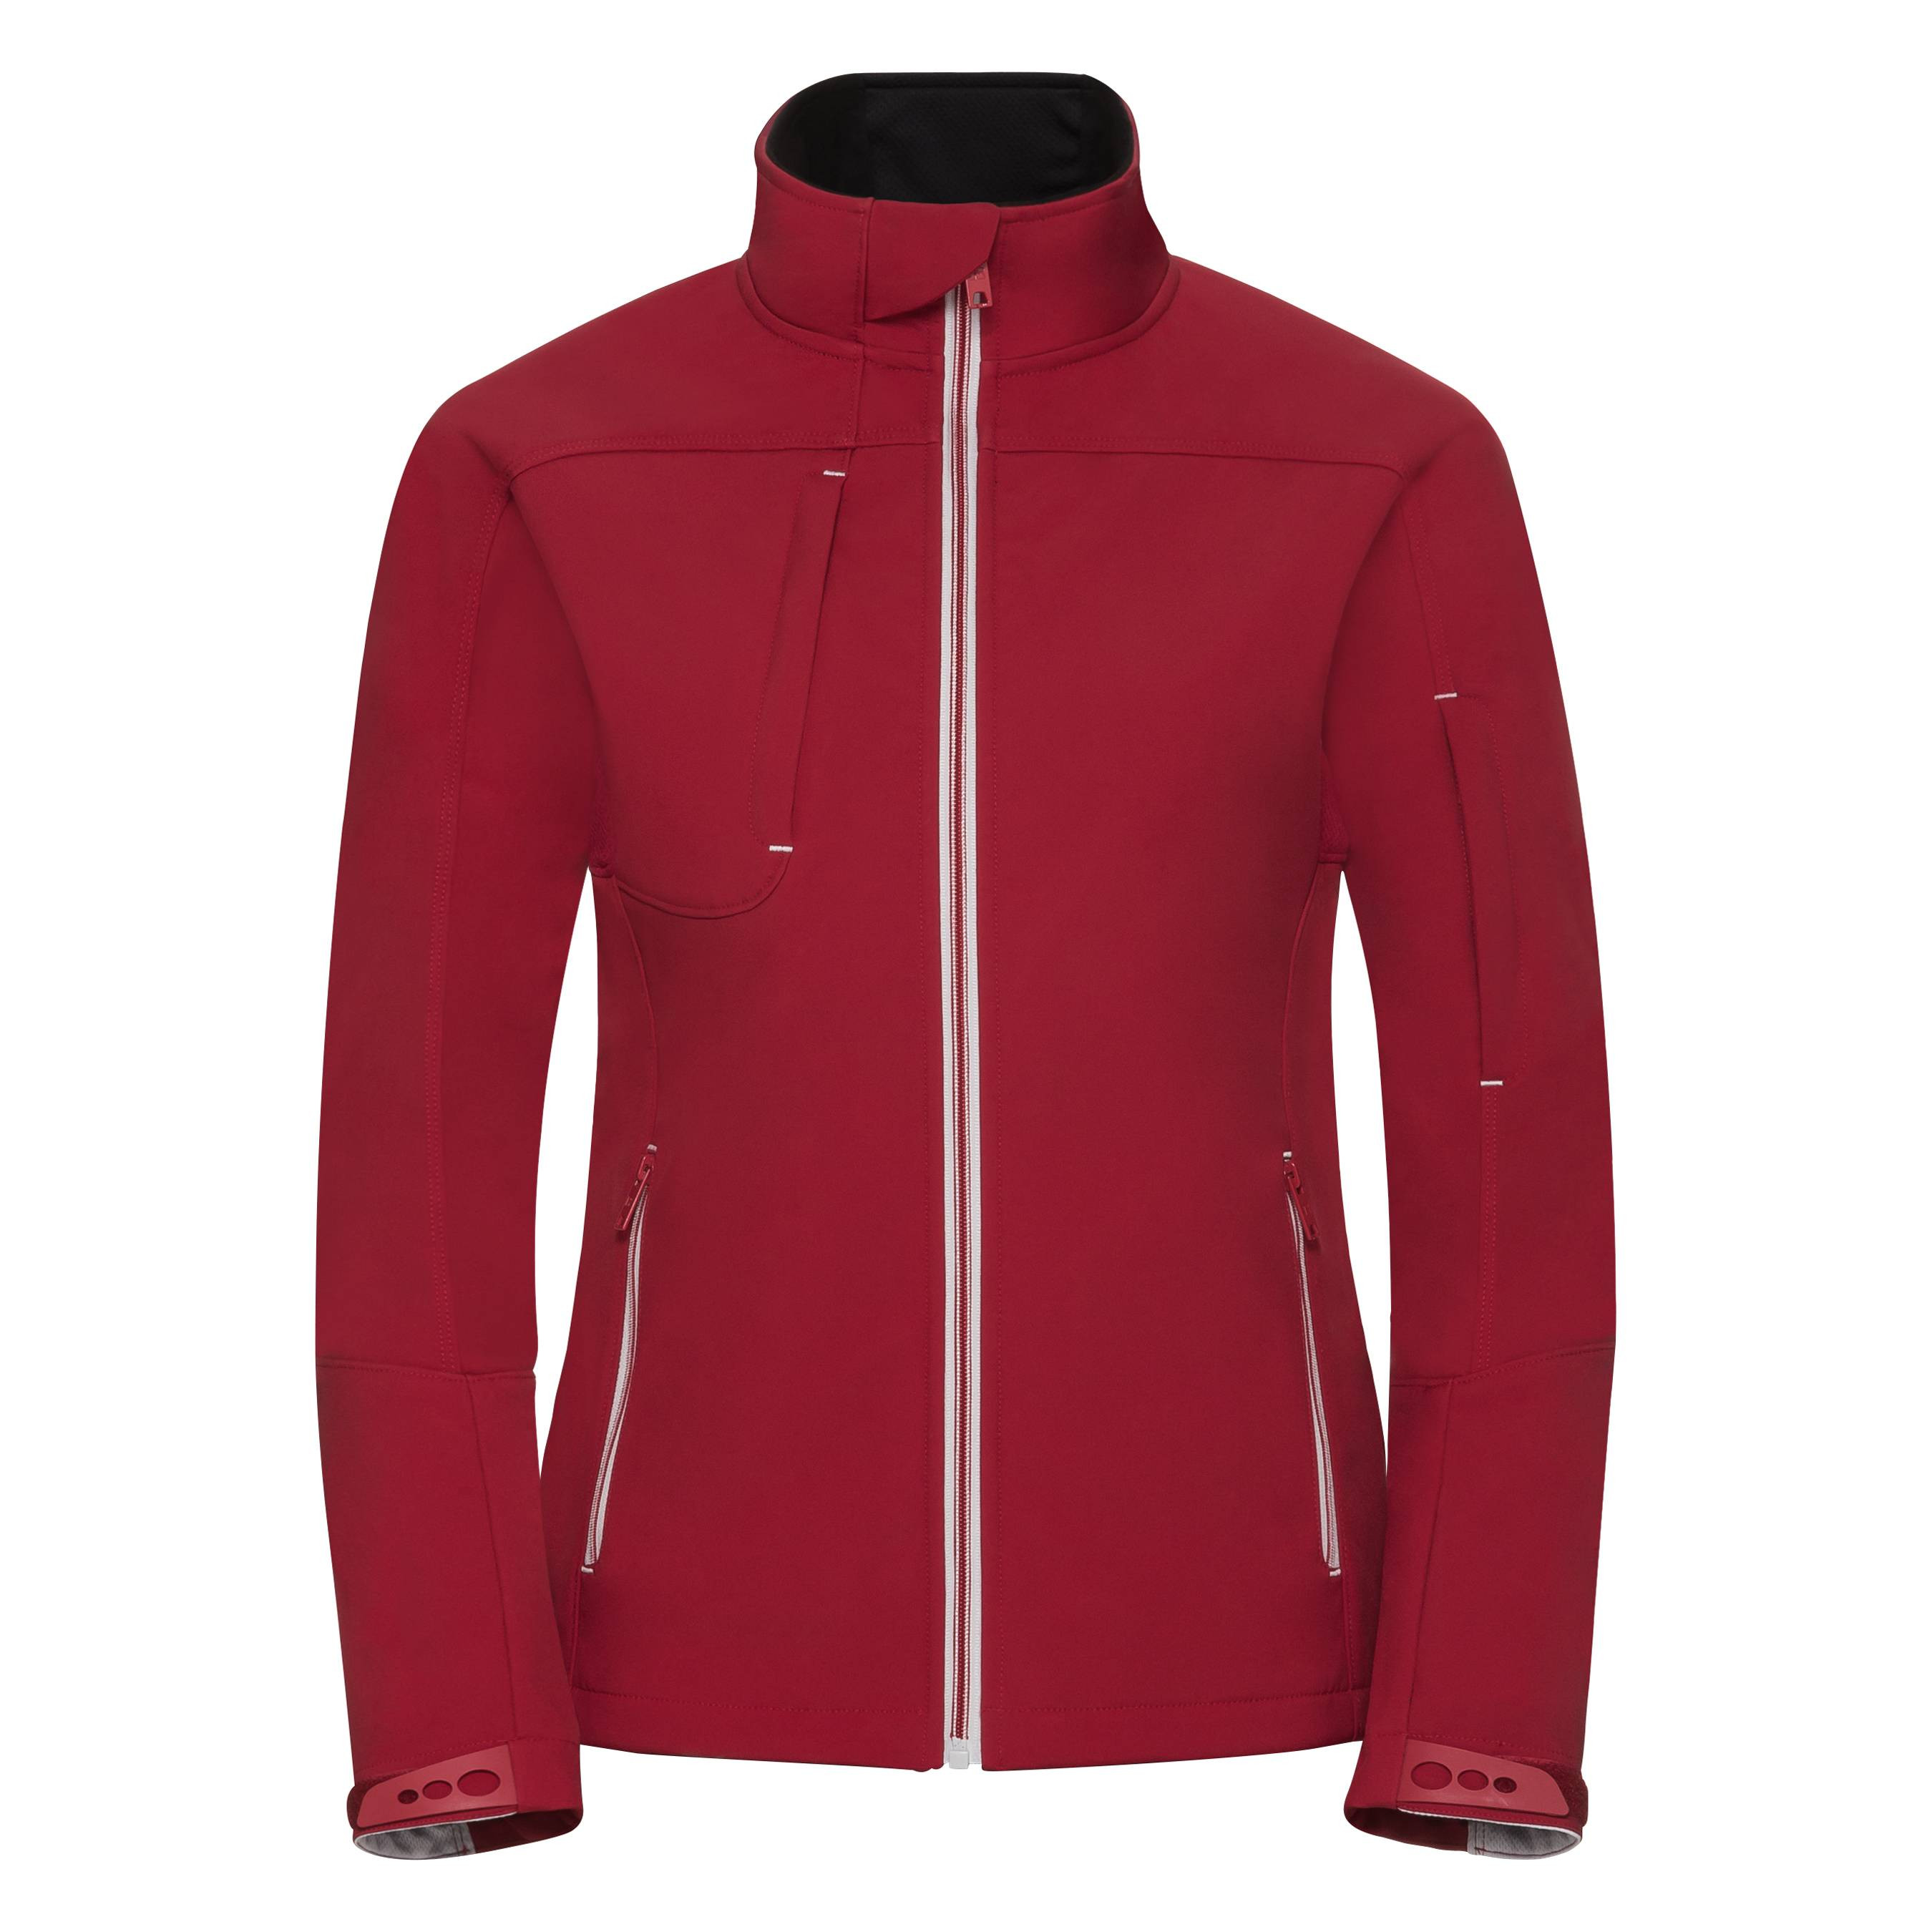 Chaqueta Softshell Bionic Mujer RUSSELL 410F, compra online